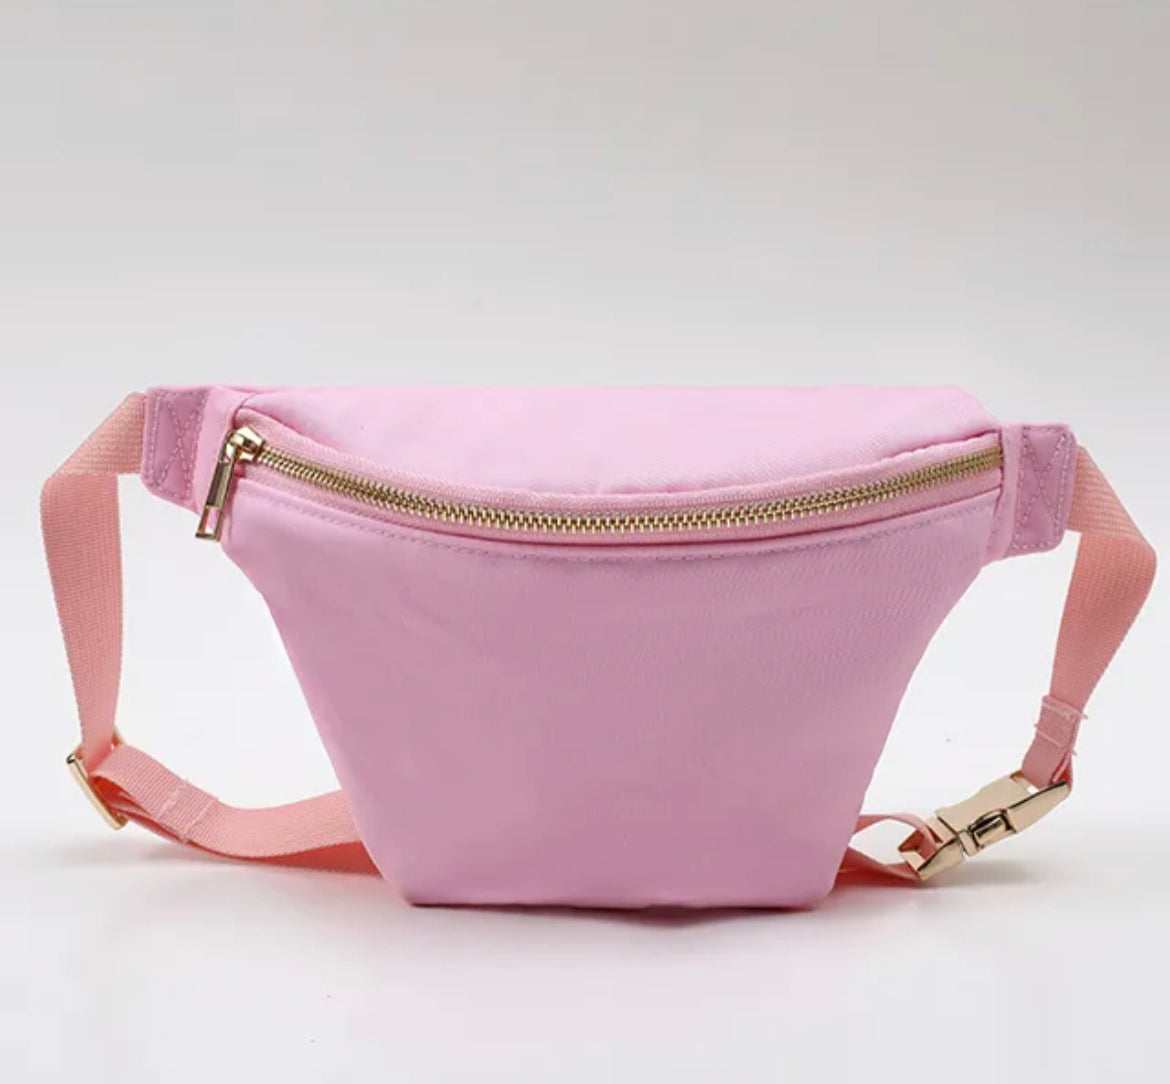 PREORDER FANNY PACK WITH MICKEY & MINNIE MOUSE HEADS